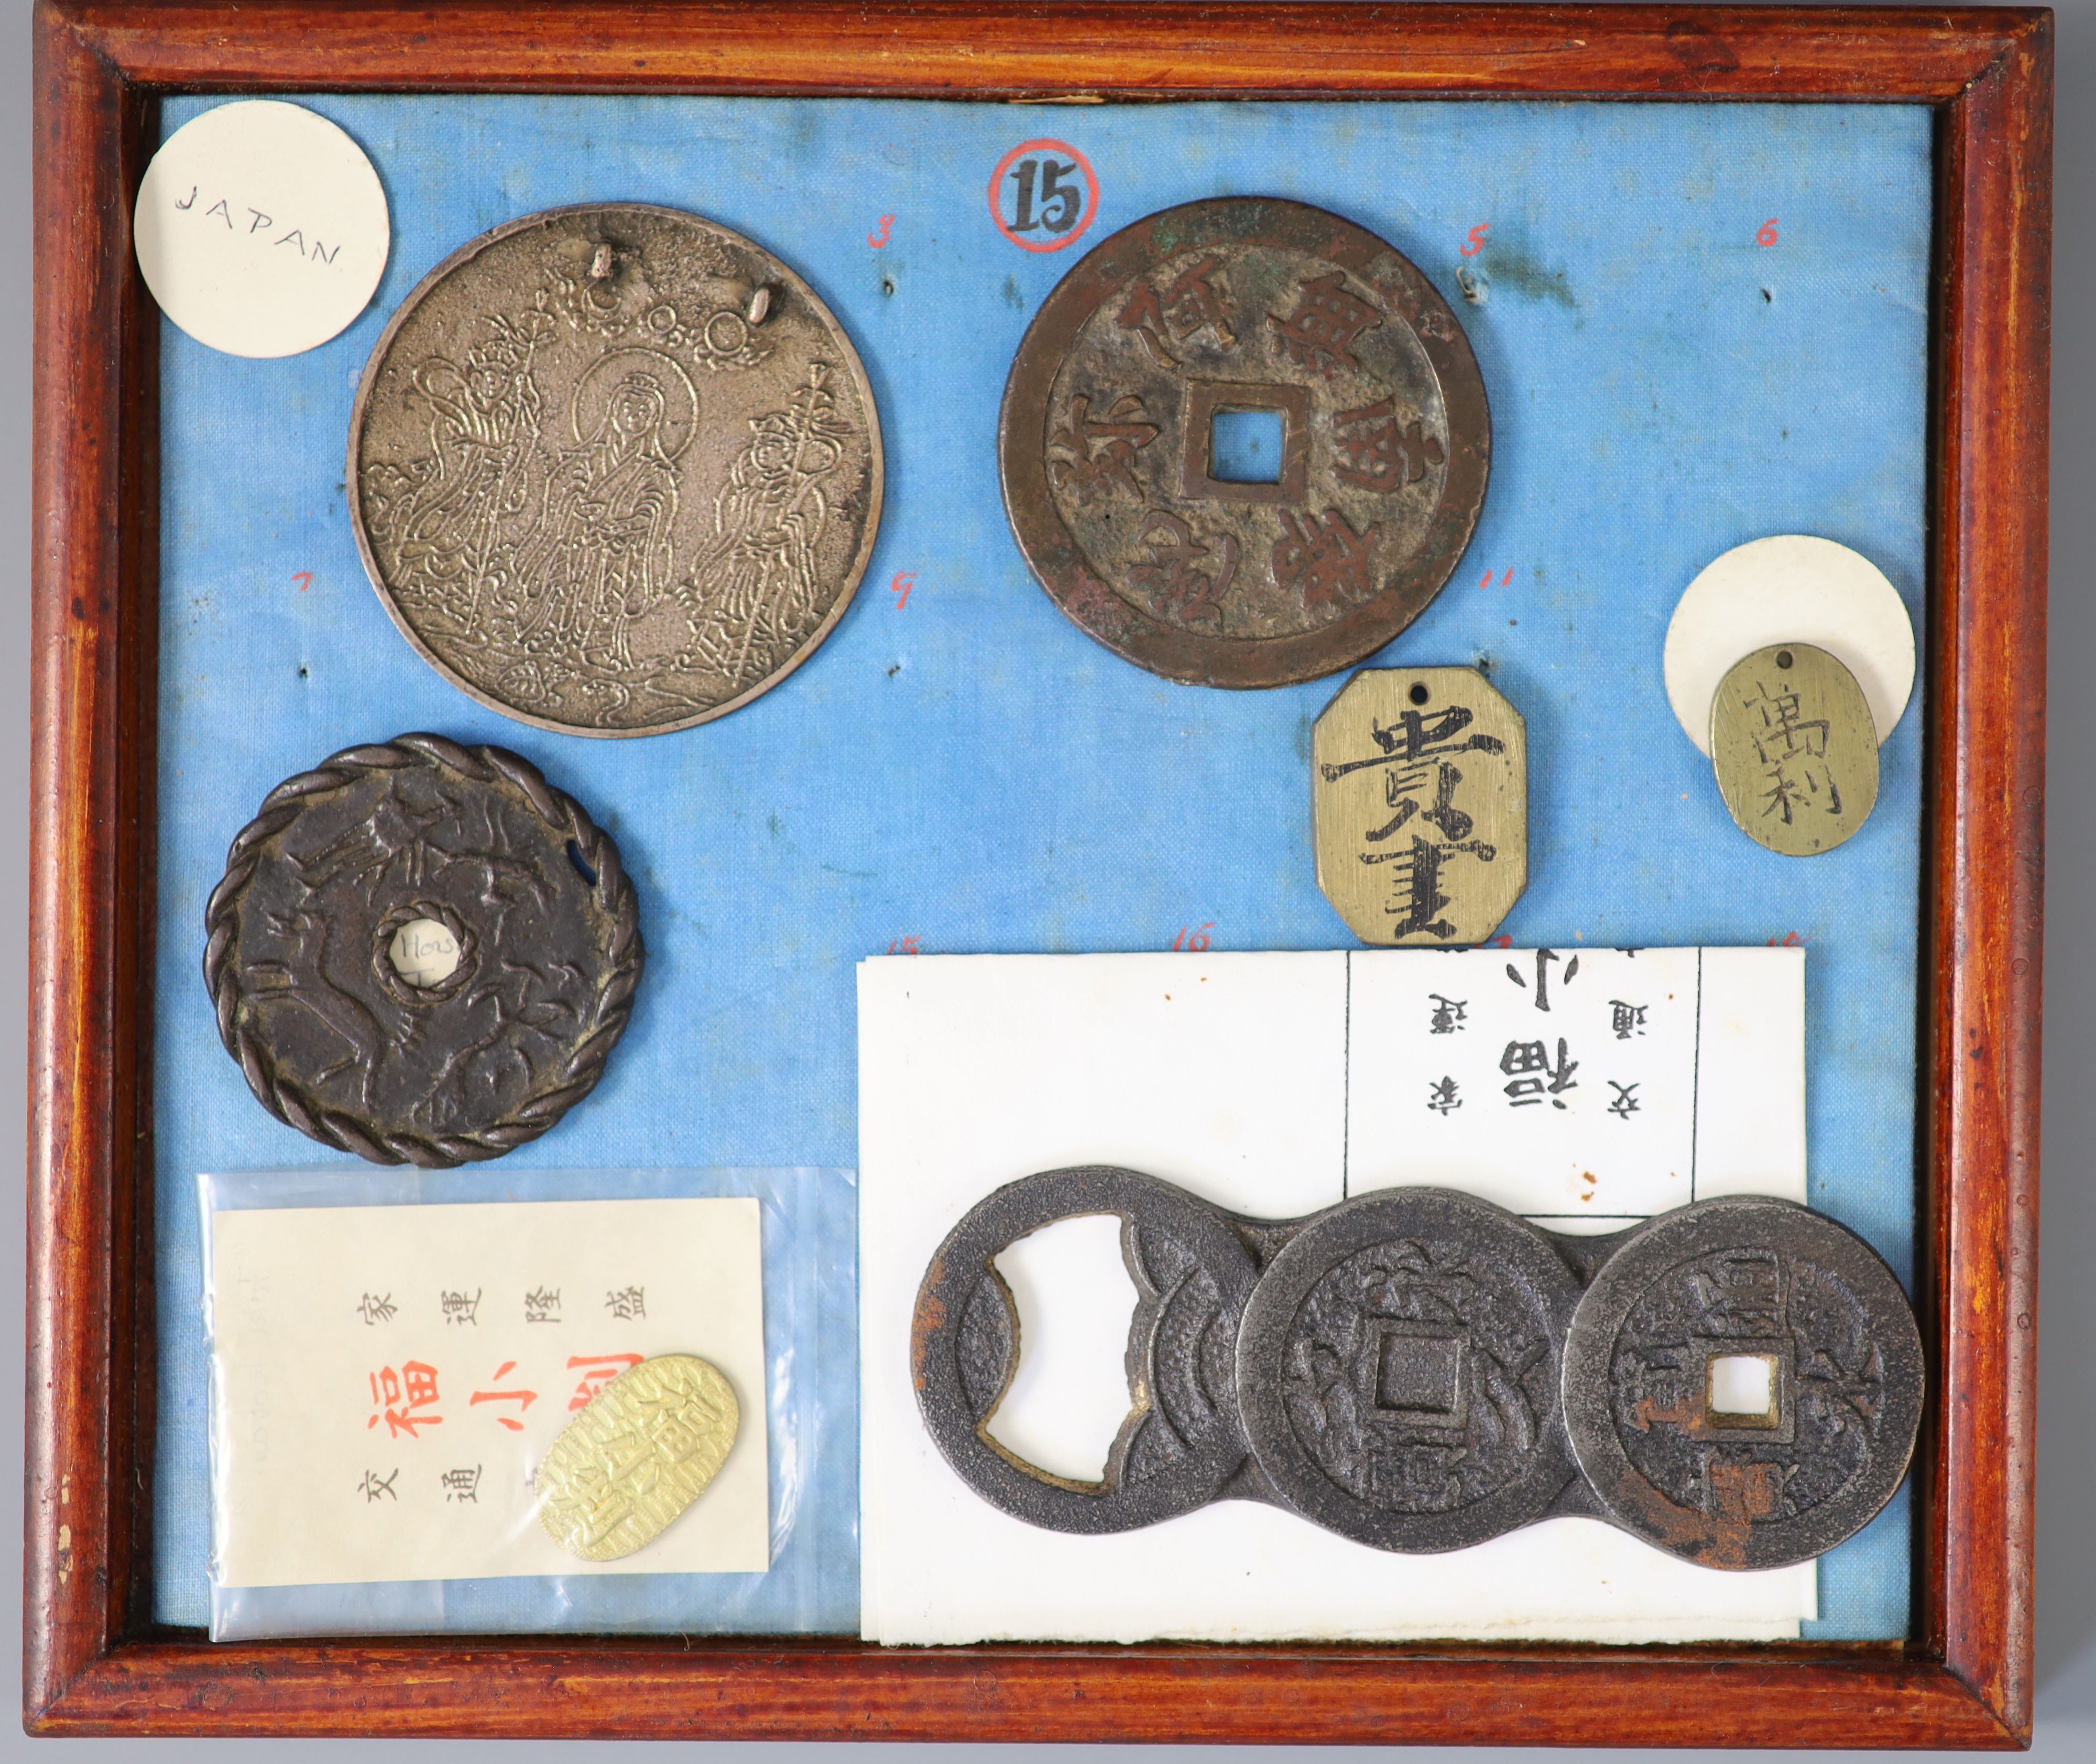 A group of 40 Japanese bronze and metal amulets or charms, 19th/20th century,